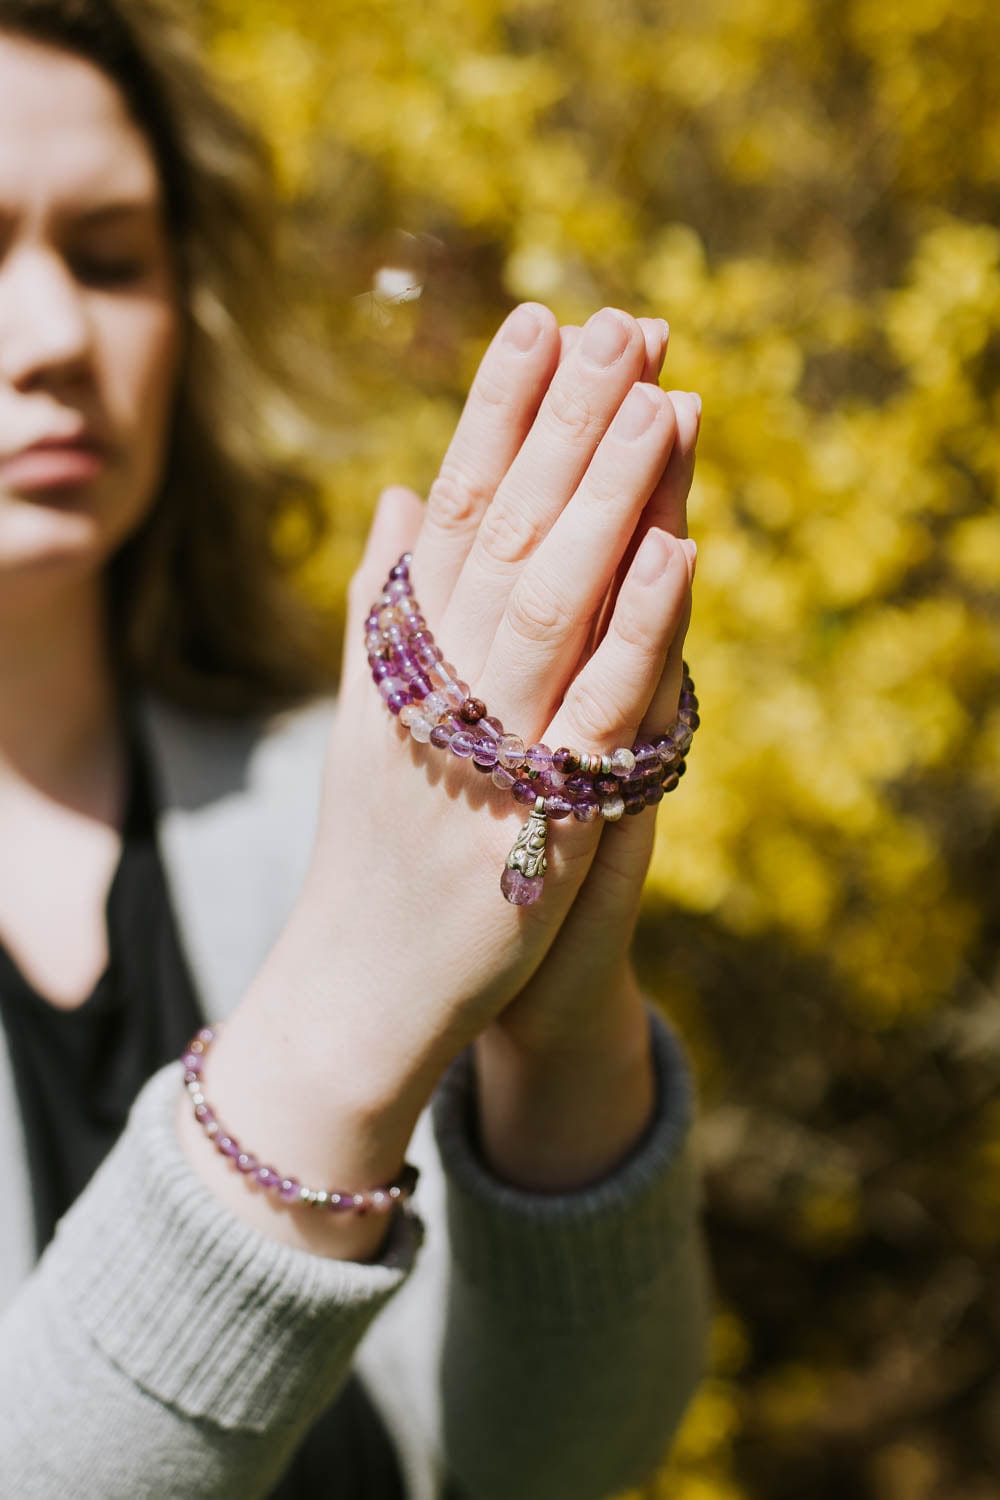 Healing Bracelet - Mountain Mala – All The Good Things From BC